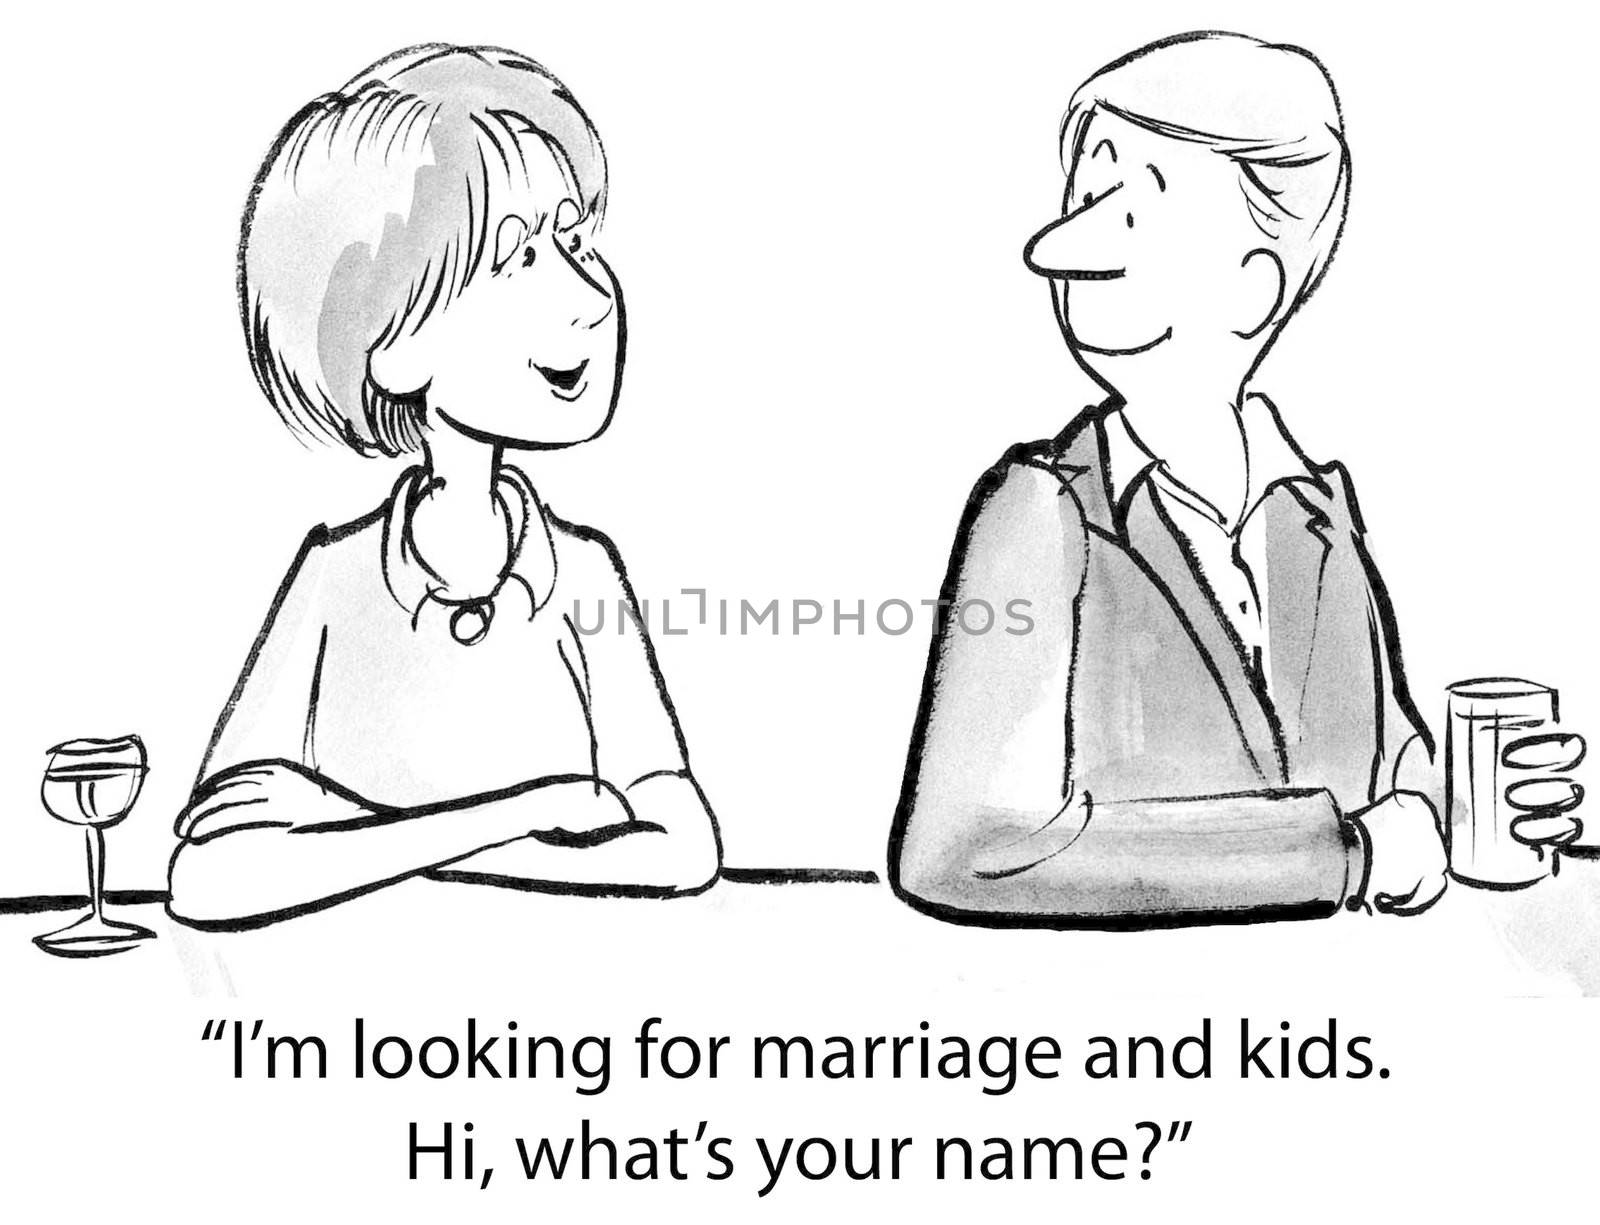 "I'm looking for marriage and kids. Hi, what's your name?"